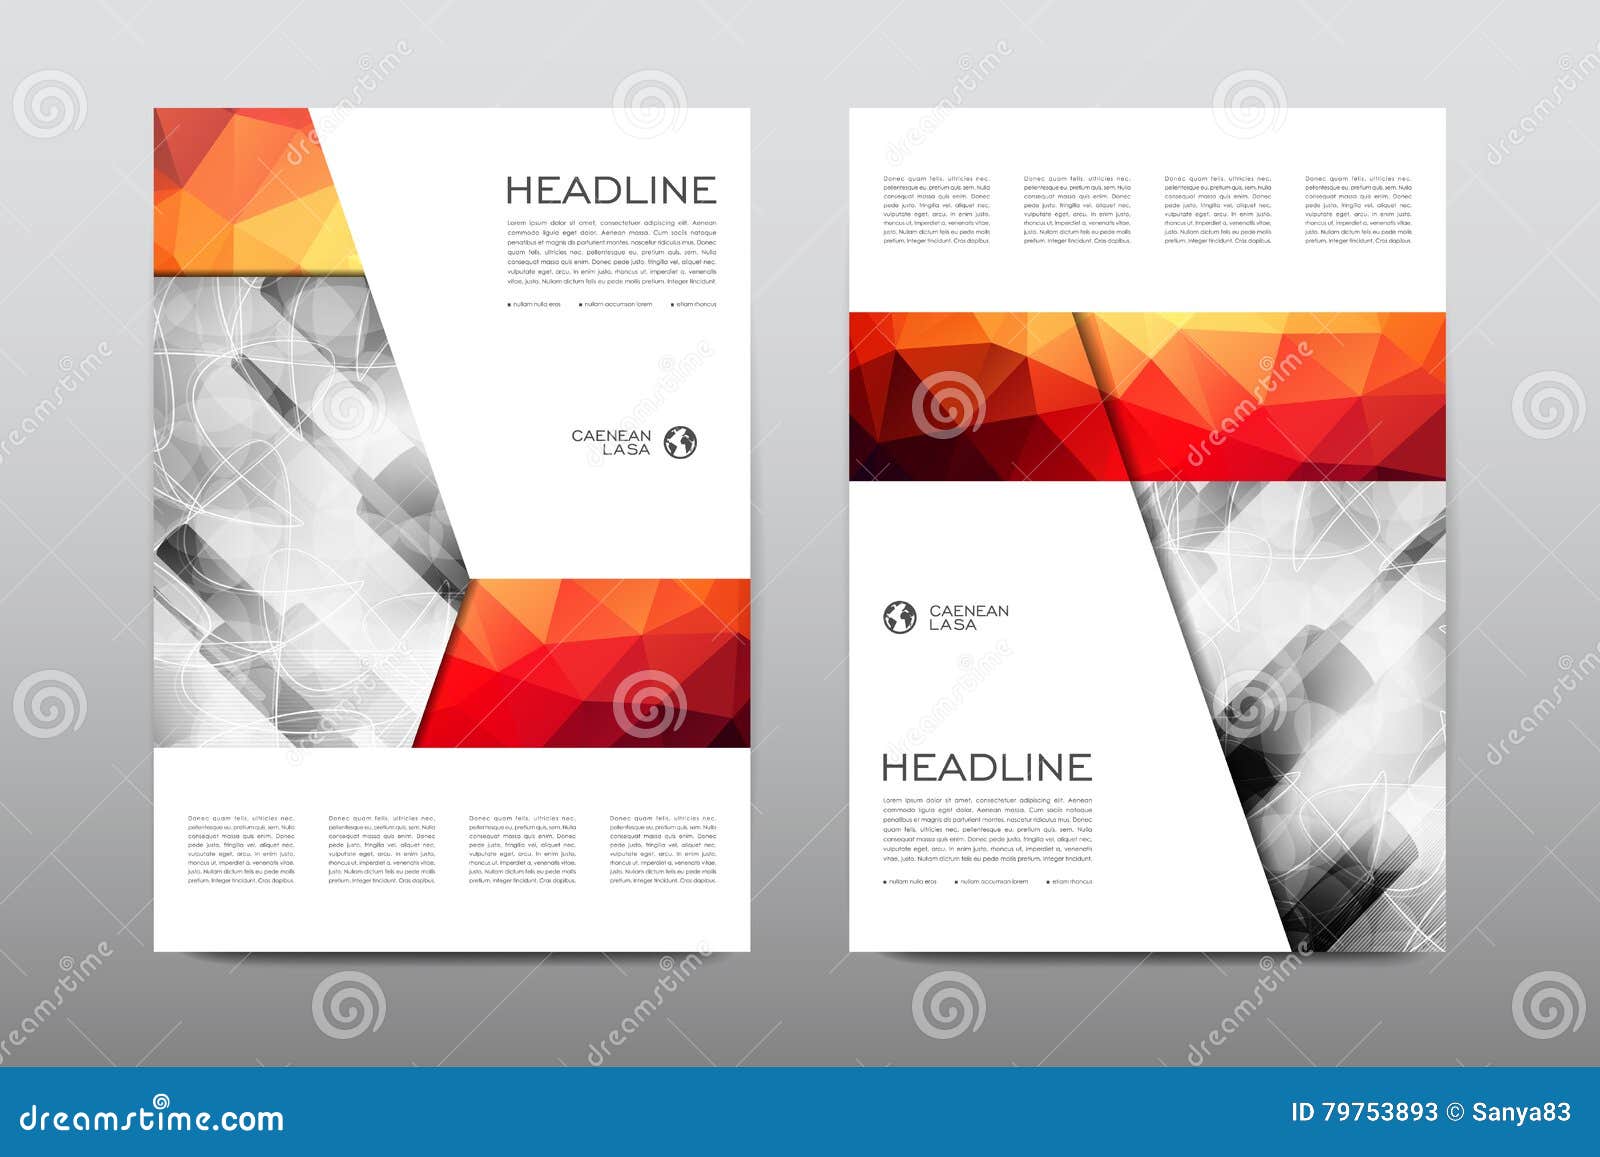 Brochure Layout Template Flyer Design Vector, Magazine Booklet Cover  Abstract Background Stock Vector - Illustration of marketing, advert:  79753893